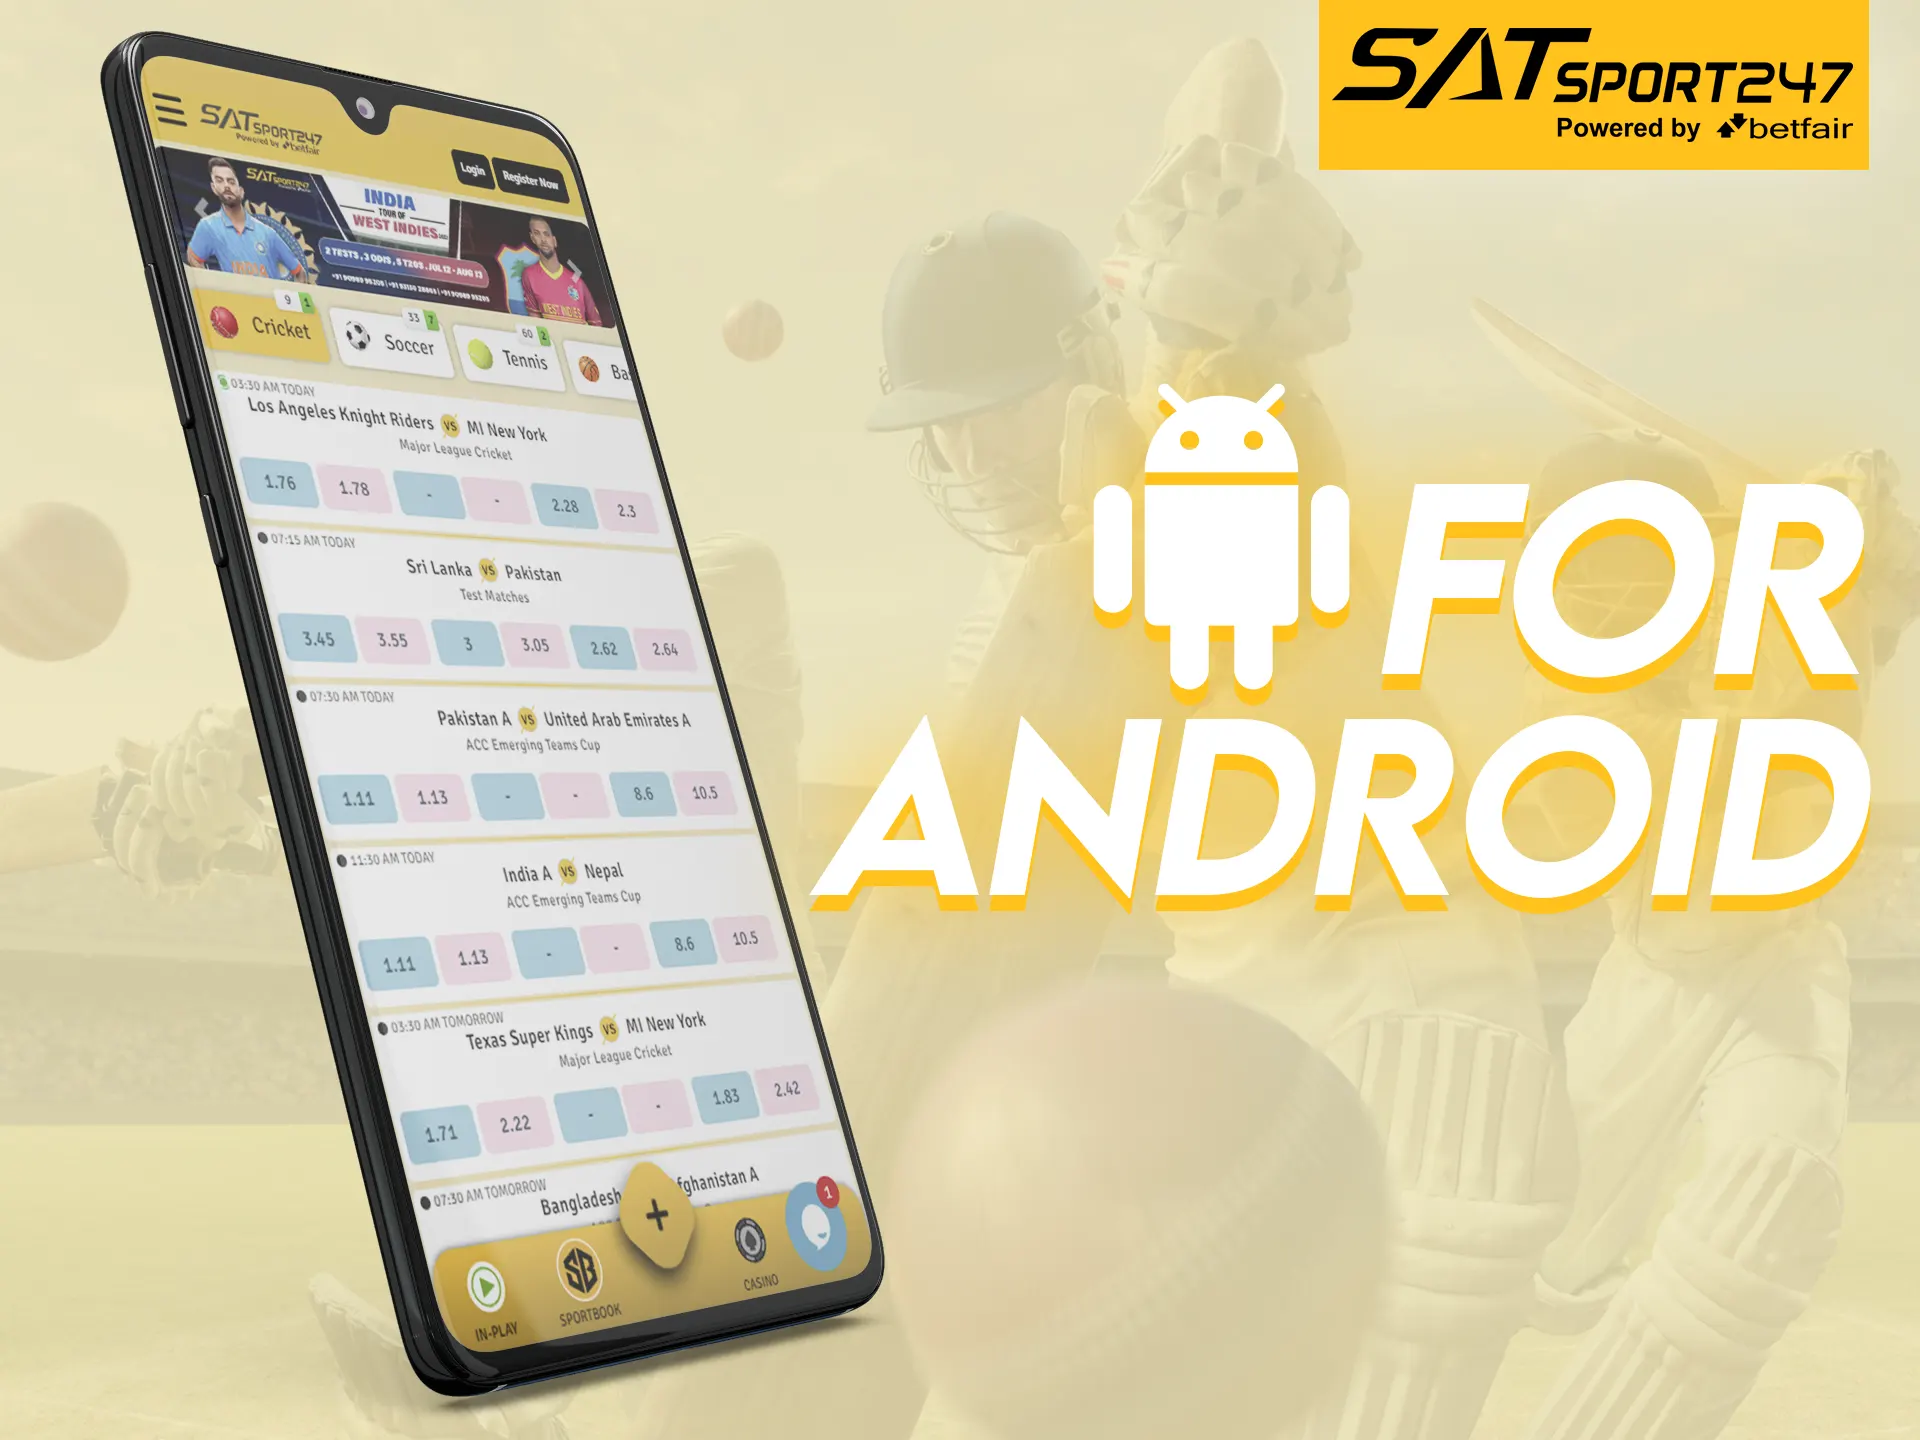 With Satsport247 you can place bets directly from your Android device.